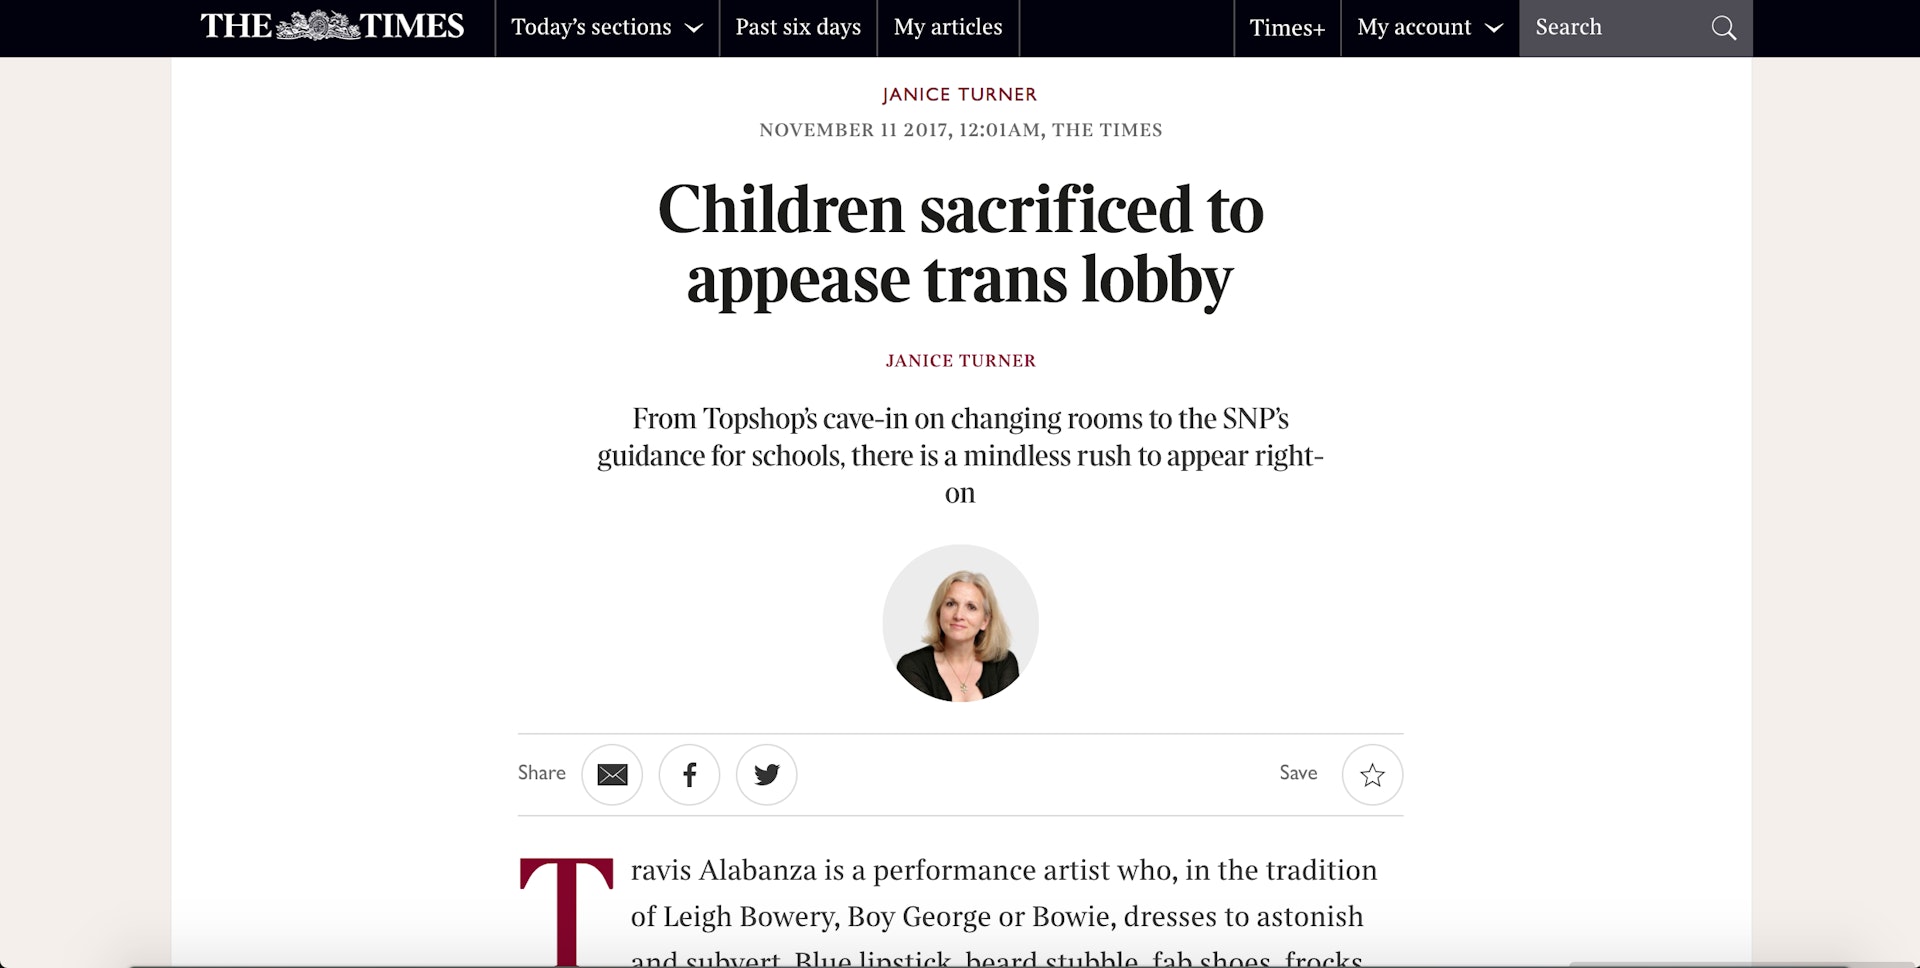 The bigoted British media is actively endangering trans people